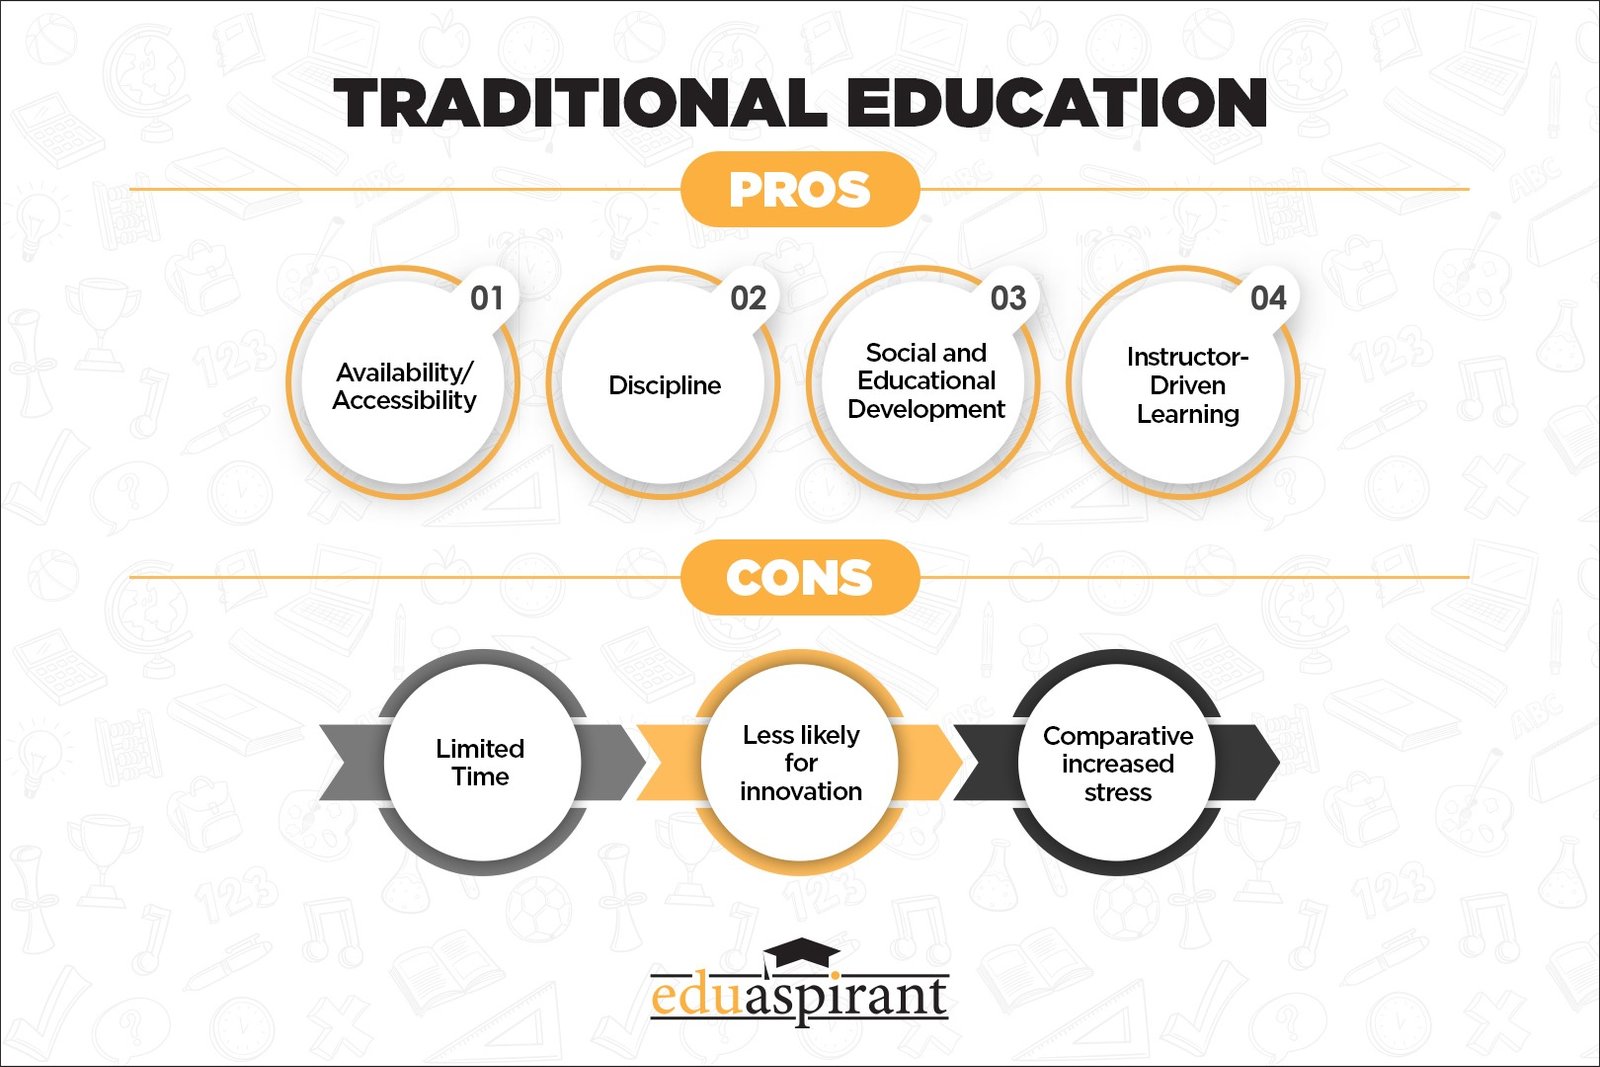 pros and cons traditional education